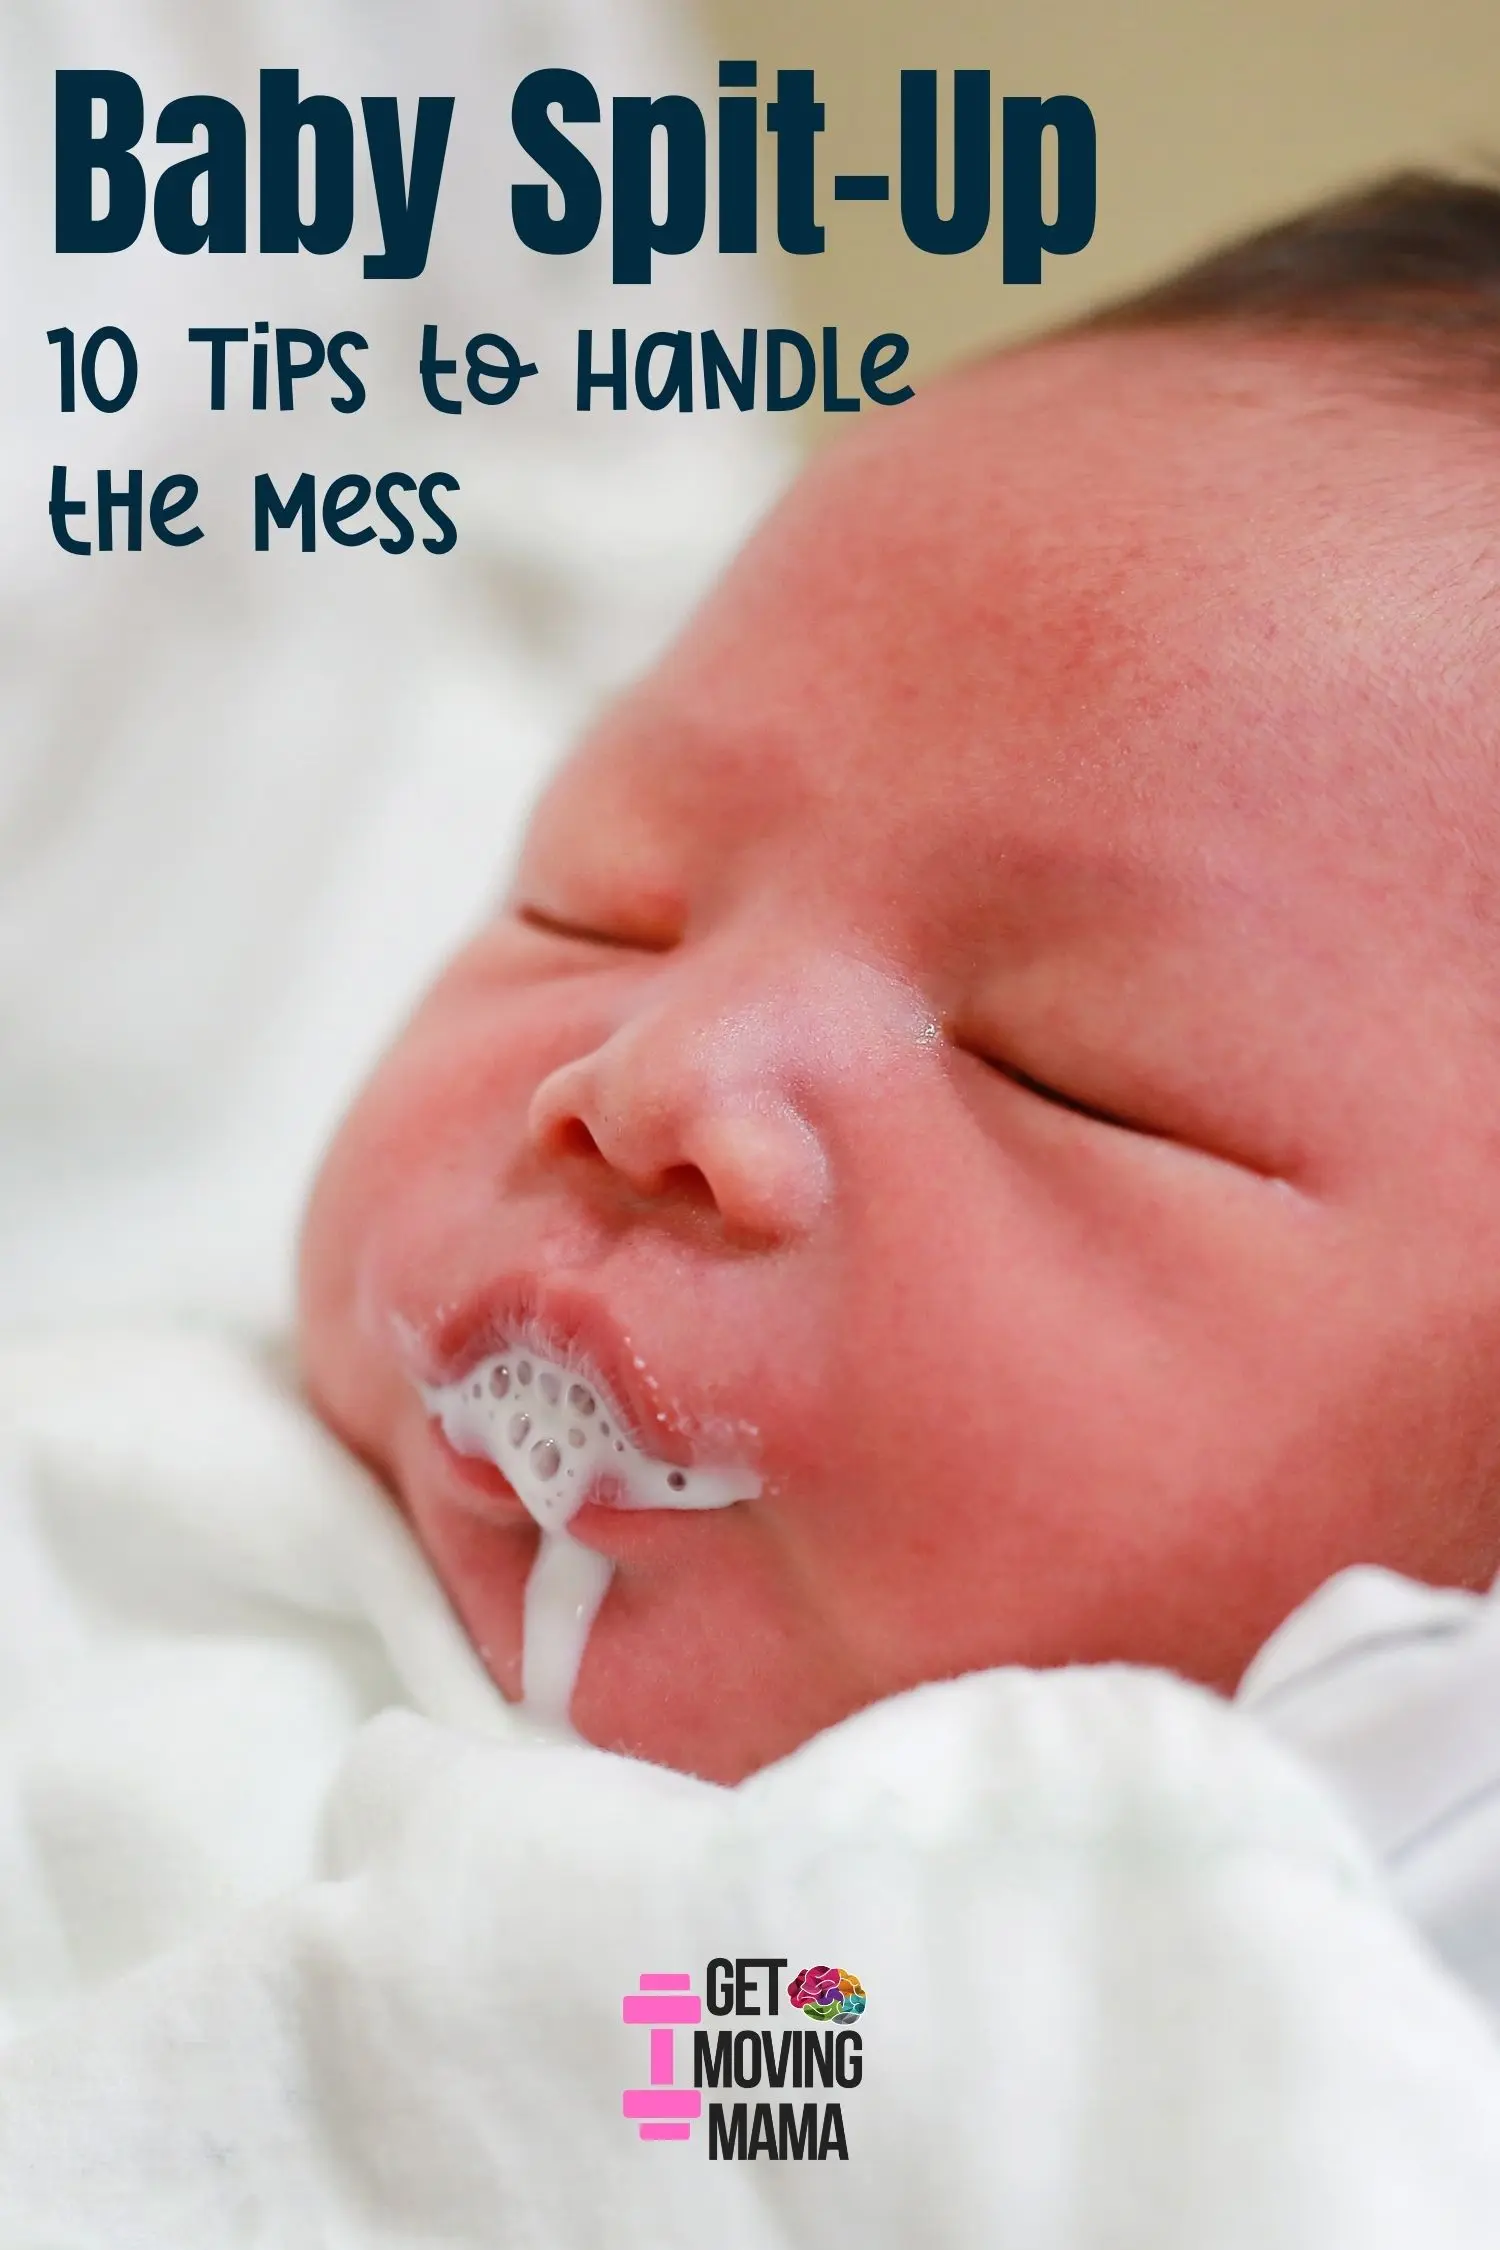 A picture of a newborn baby spitting up with text that reads "Baby Spit-Up 10 Tips to Handle the Mess".